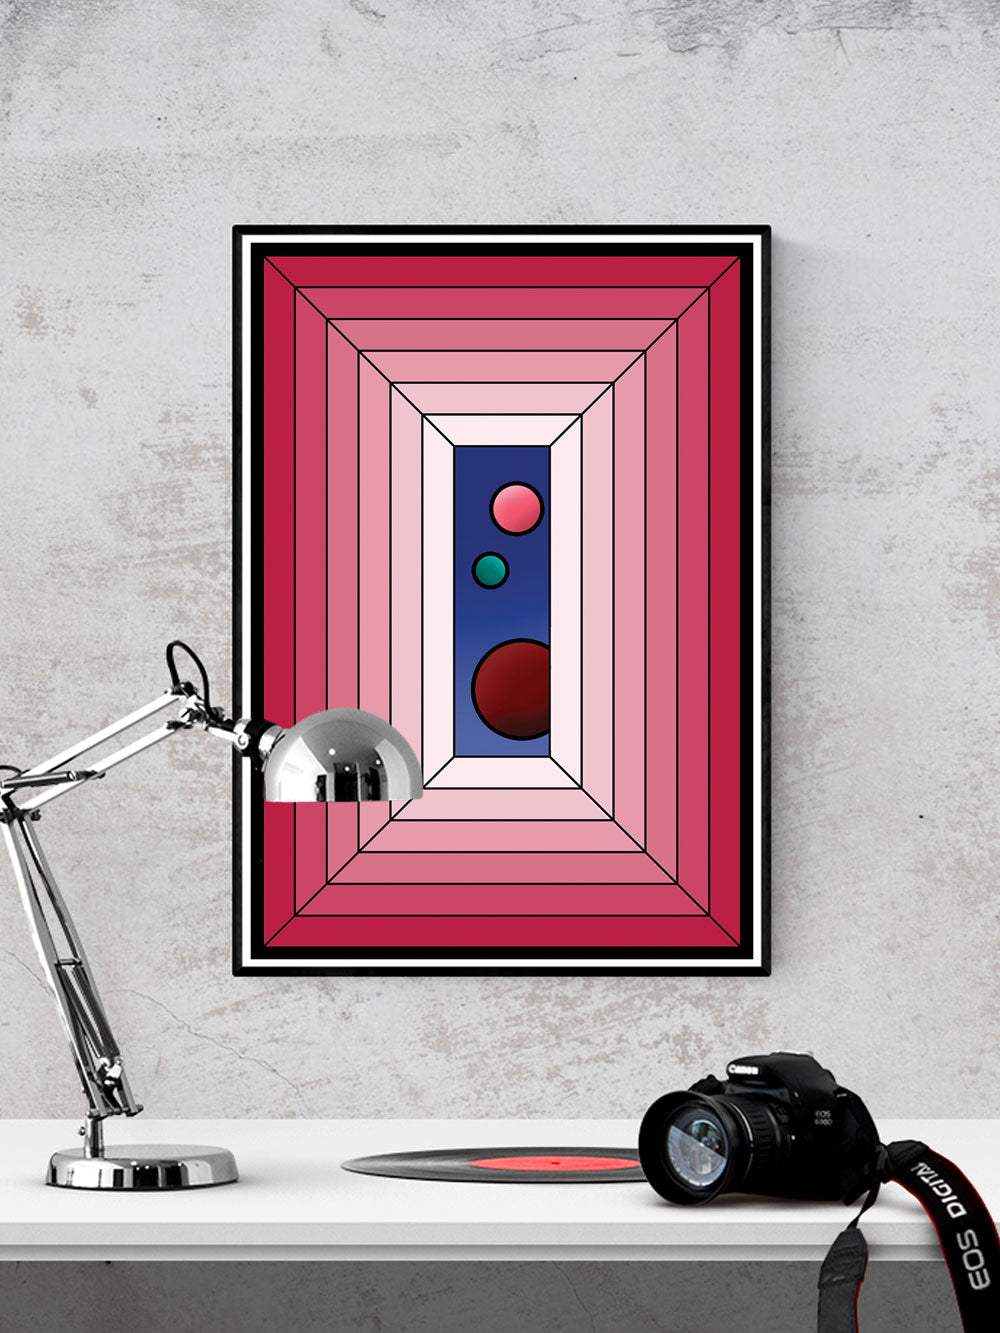 The Window Abstract Surreal Art in a frame on a wall